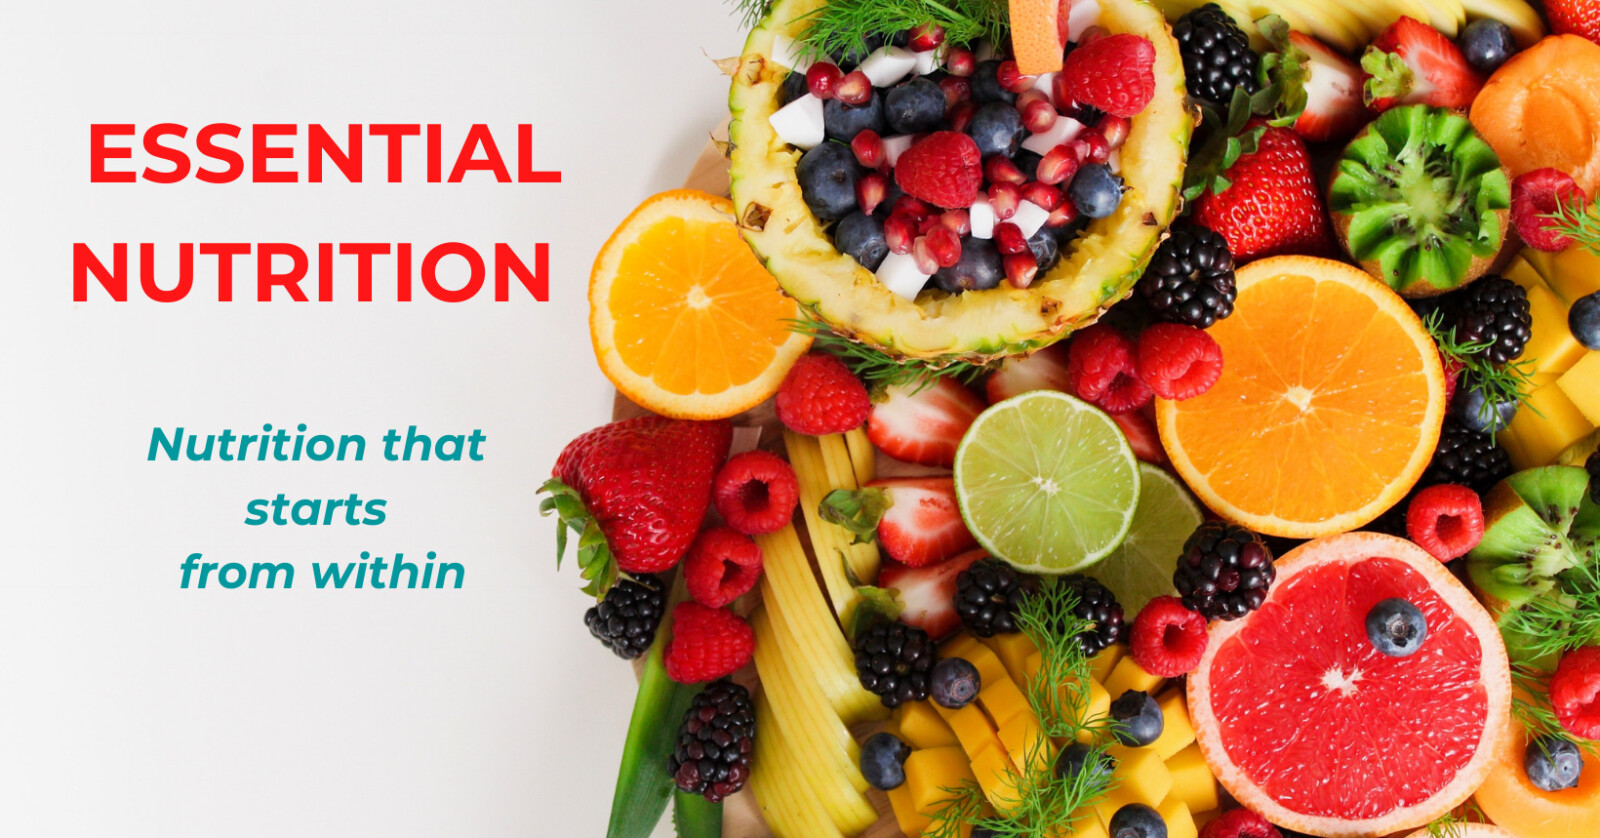 Essential Nutrition that starts from within